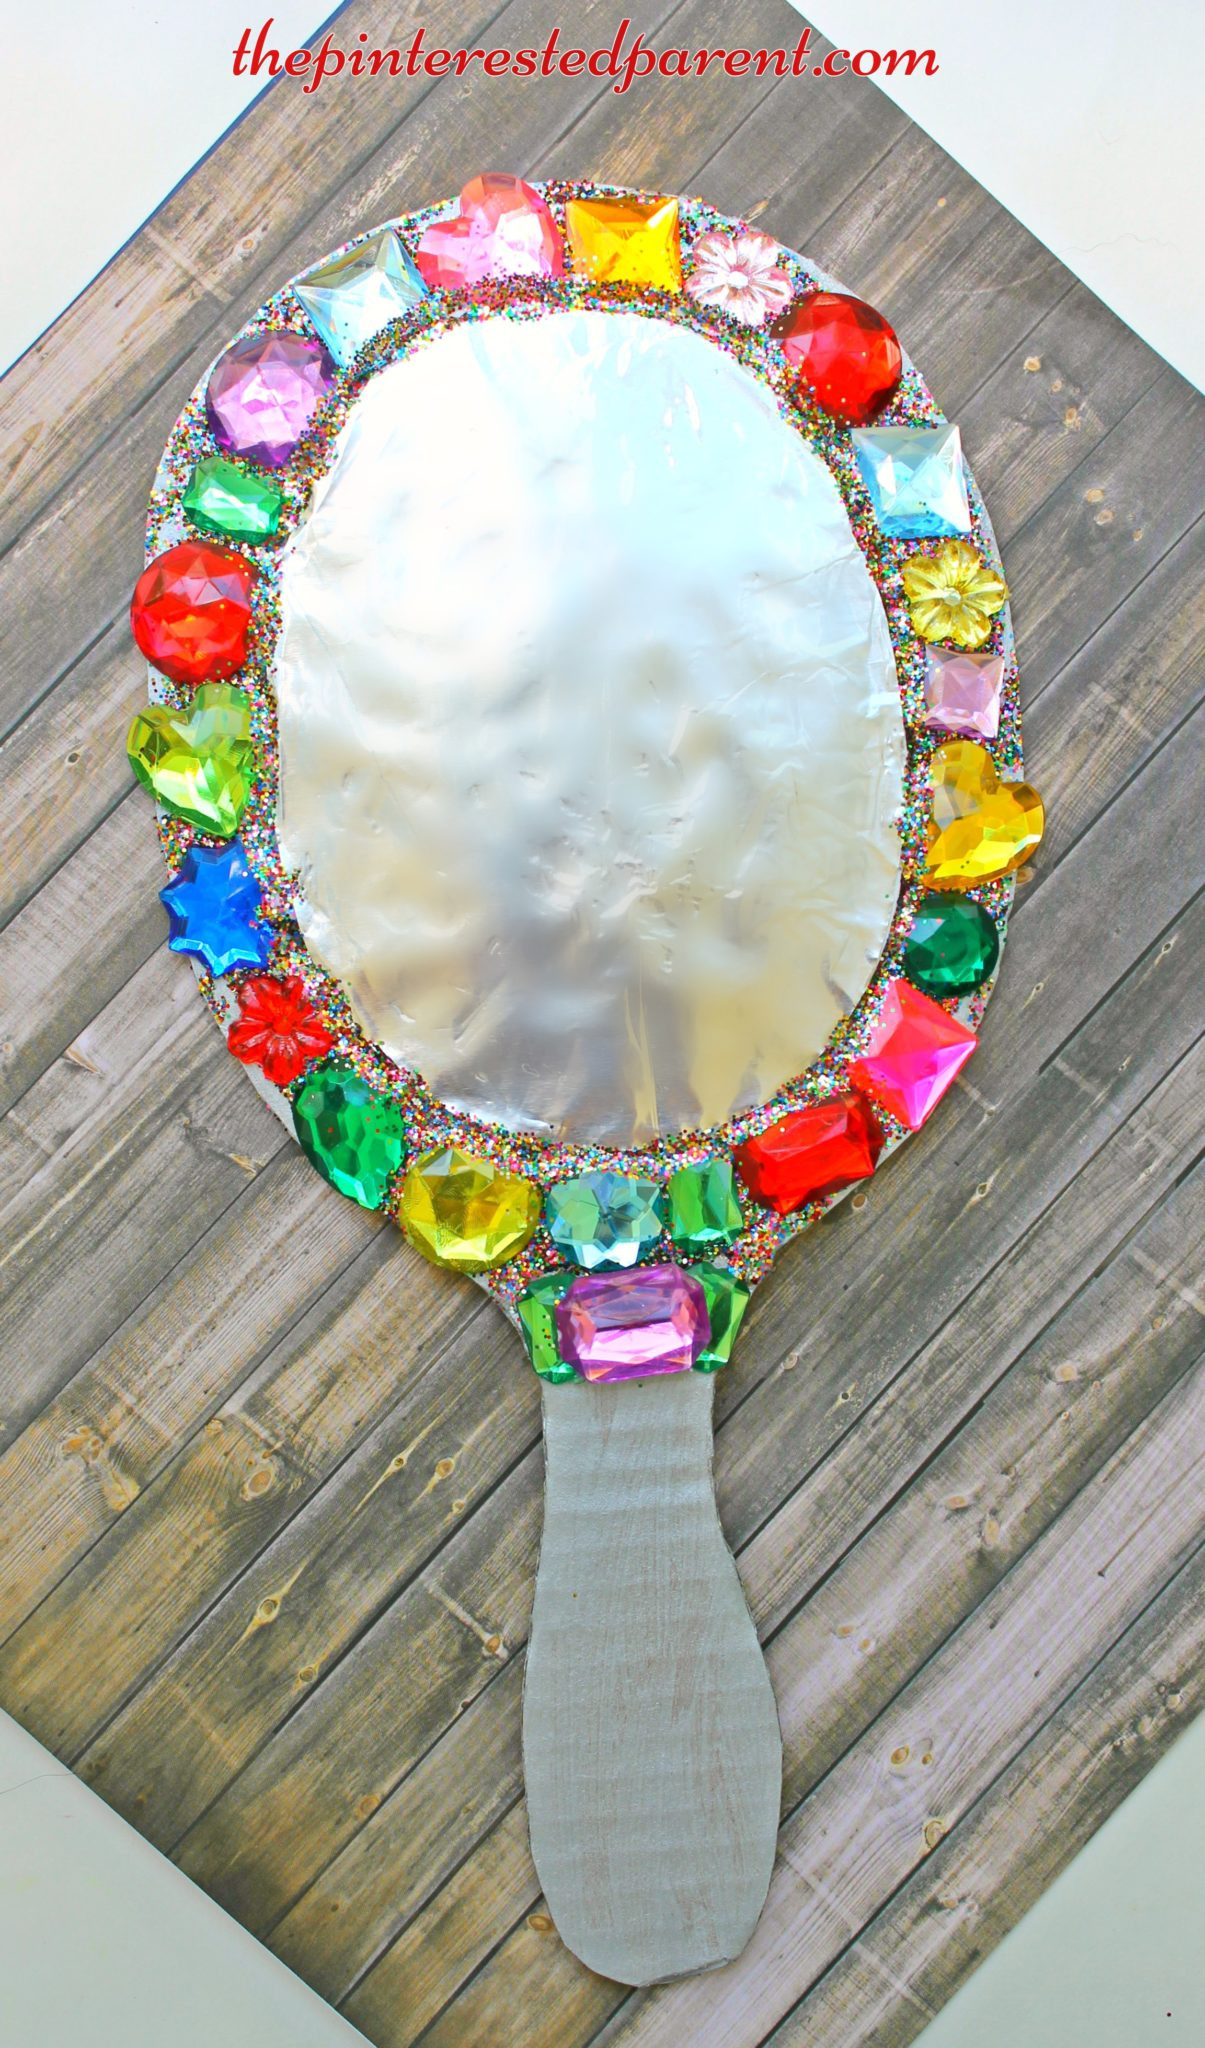 Art And Craft Ideas For Toddlers
 Jeweled Cardboard Mirror Craft – The Pinterested Parent